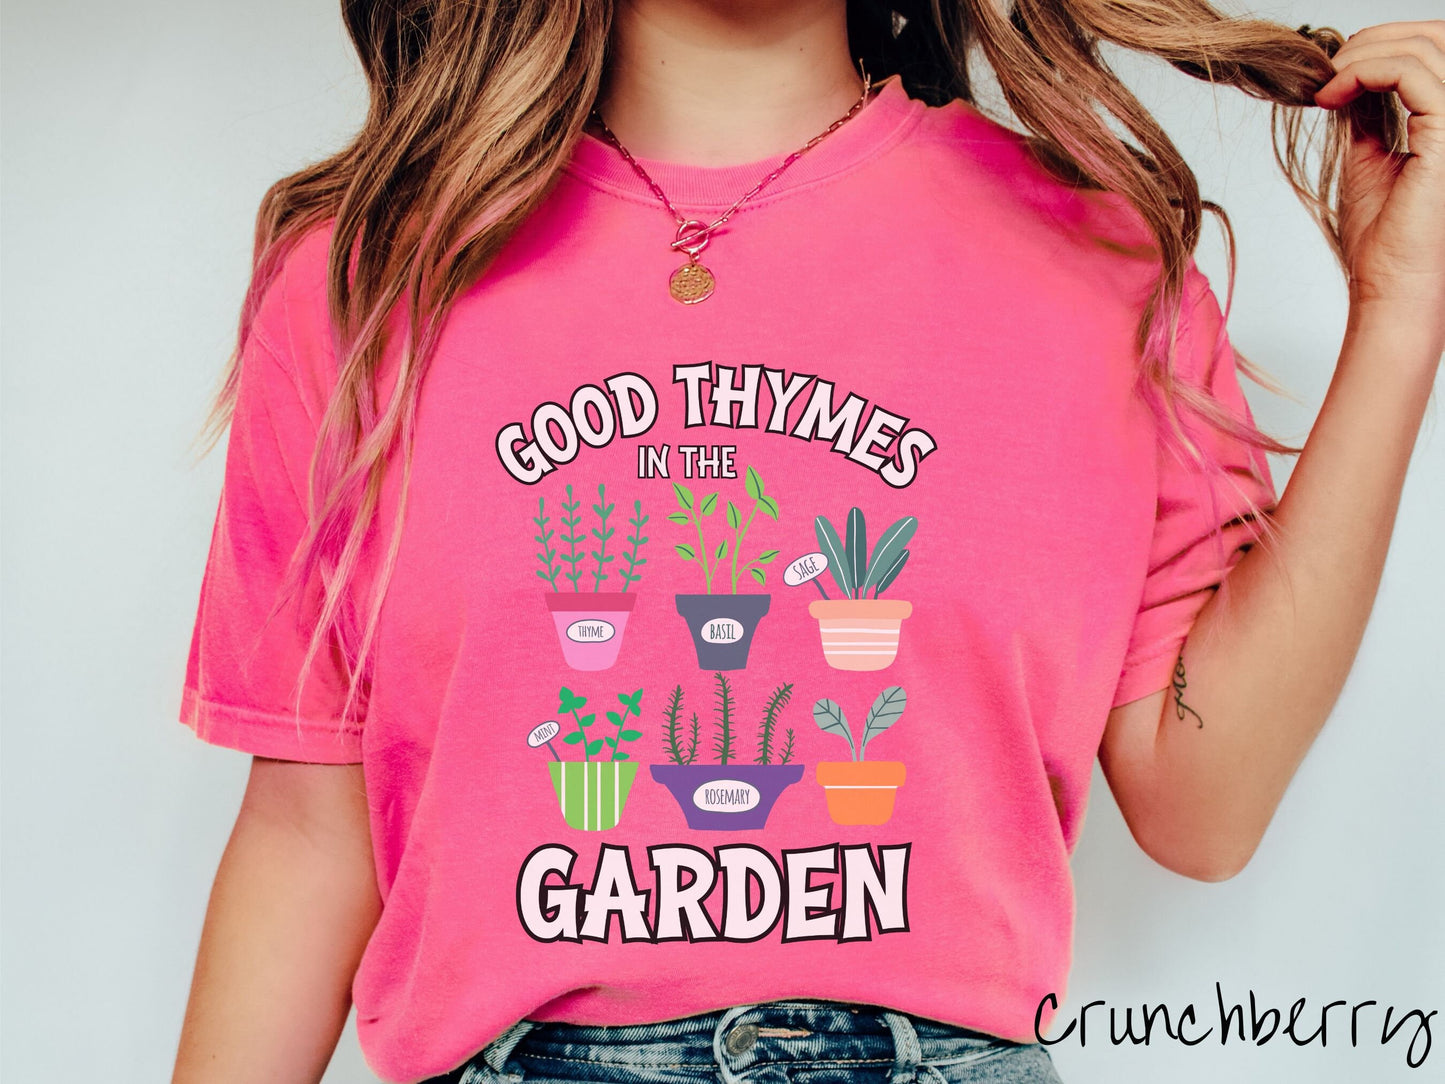 A woman wearing a cute, vintage crunchberry colored Comfort Colors t-shirt with the text Good Thymes in the Garden in white font. In between the text are different potted vegetables in colorful pots like thyme, basil, sage, and mint.